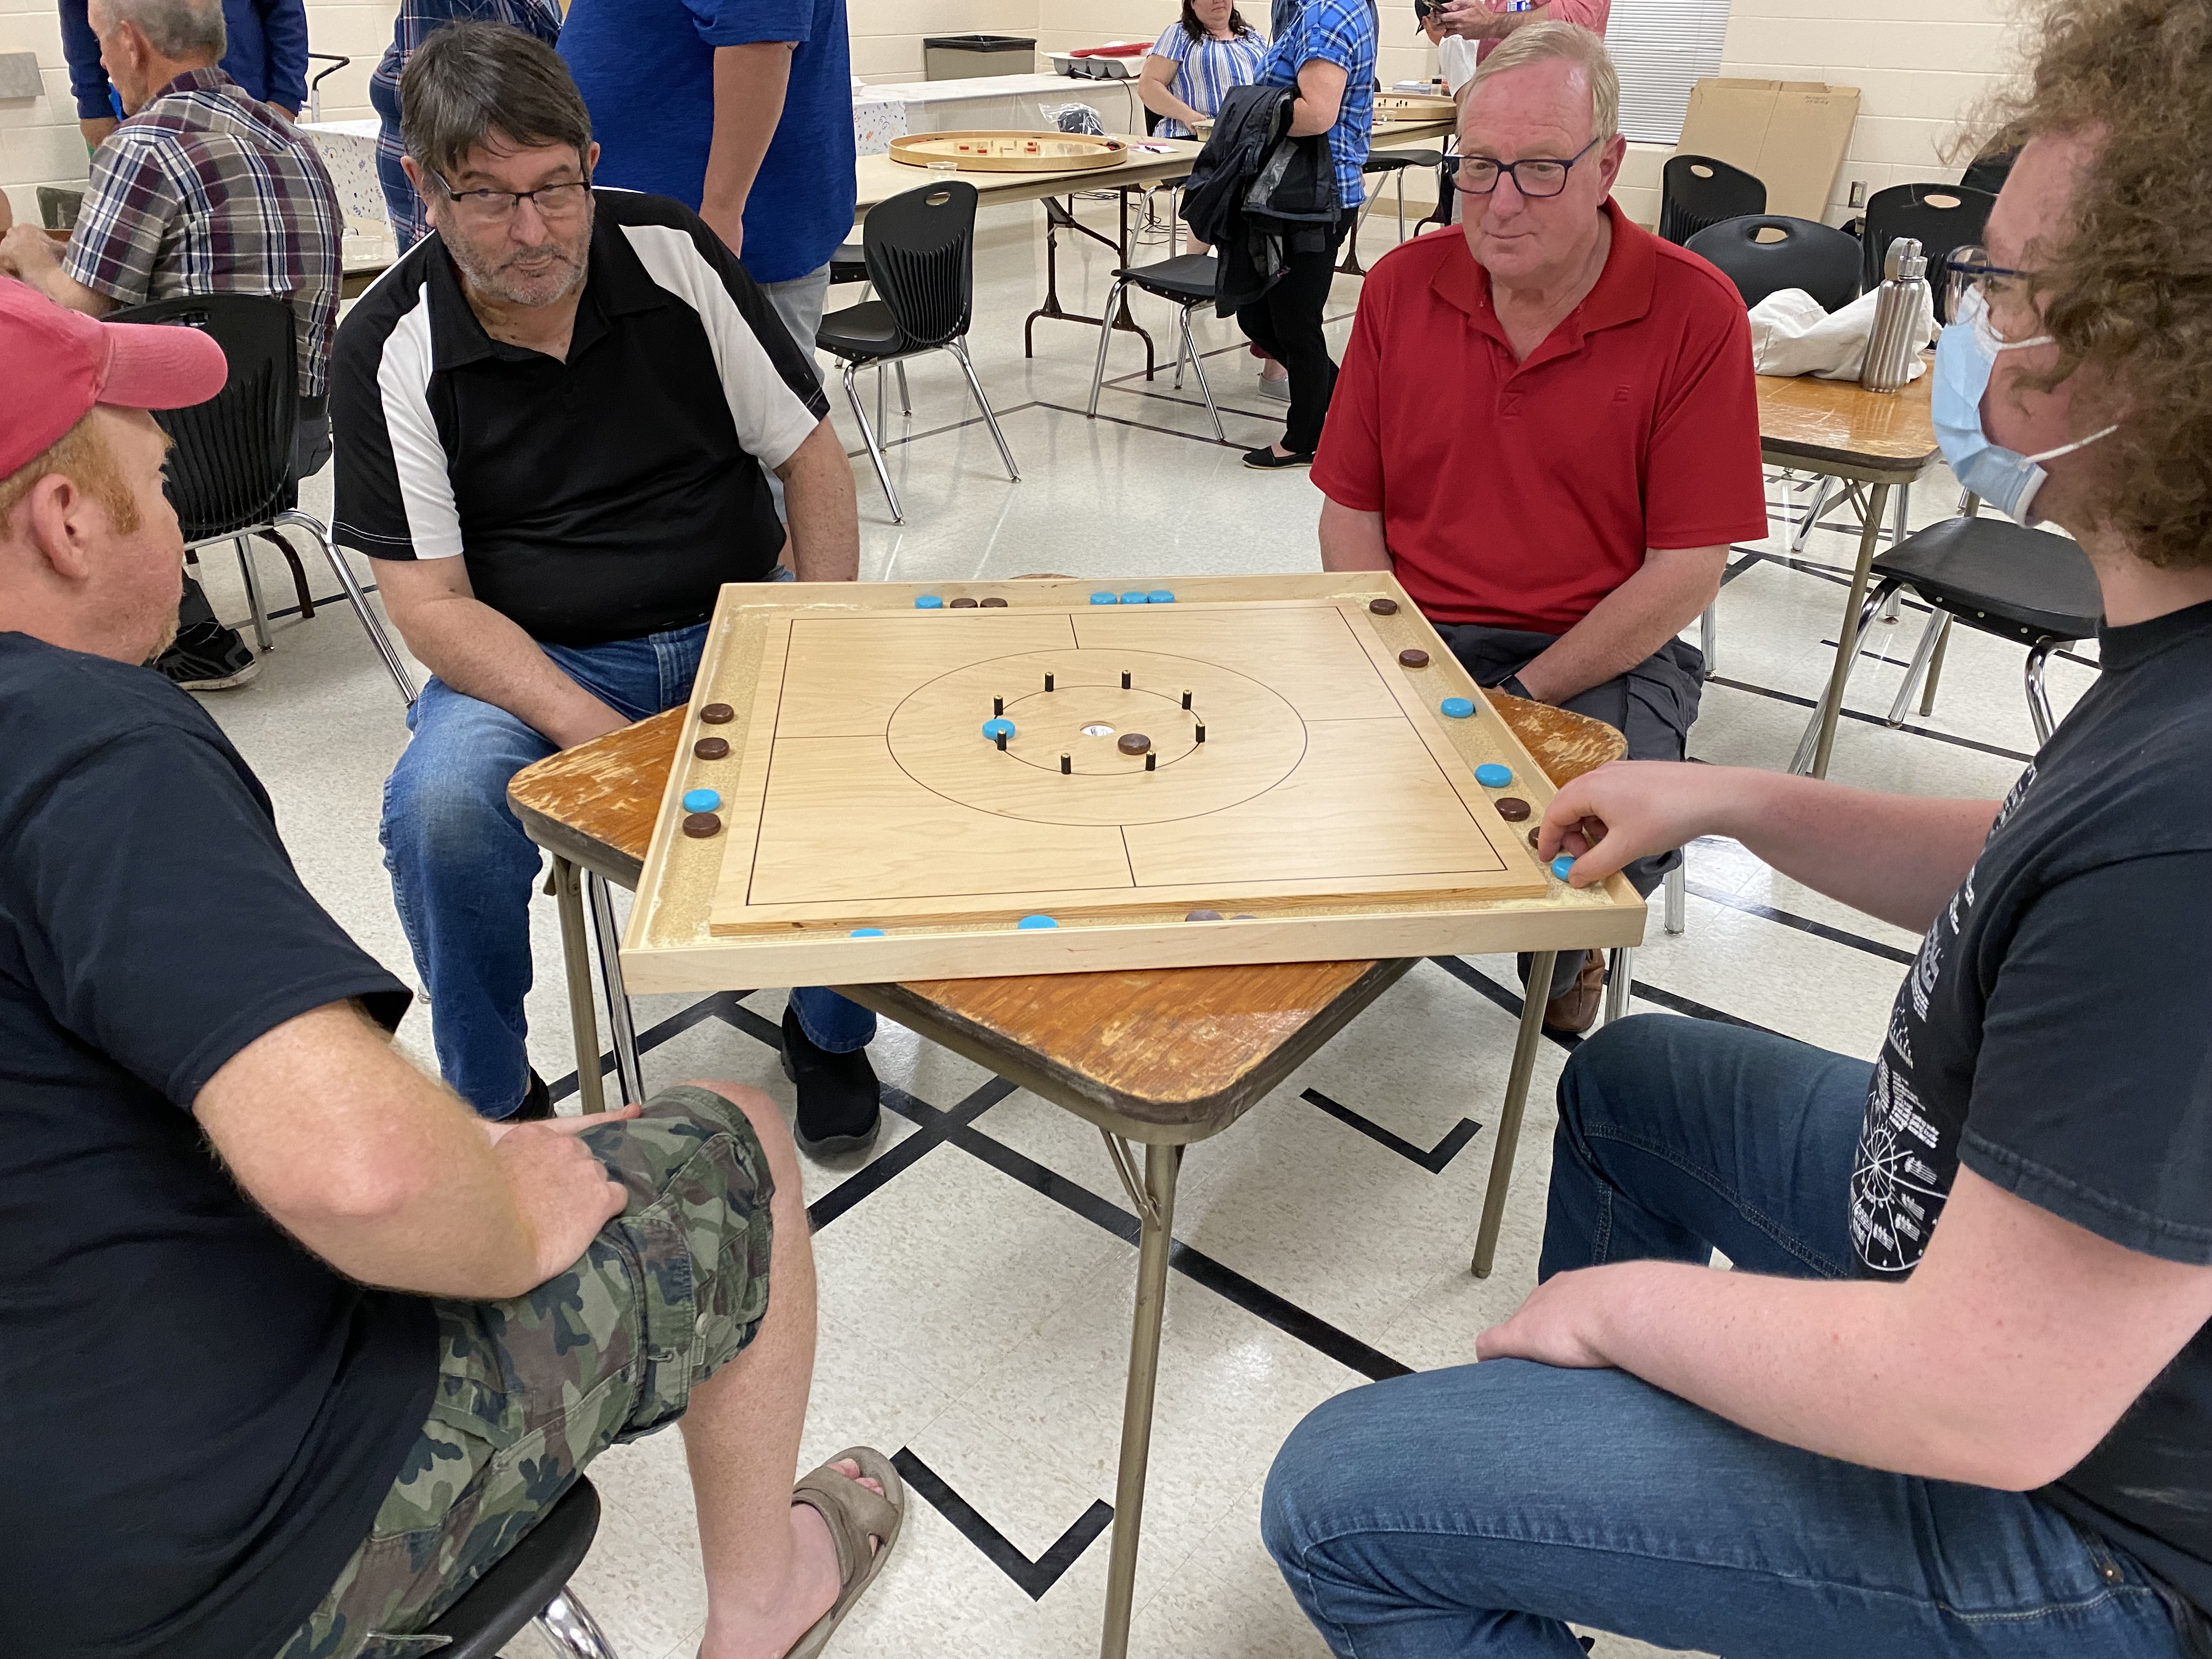 Players compete on square board